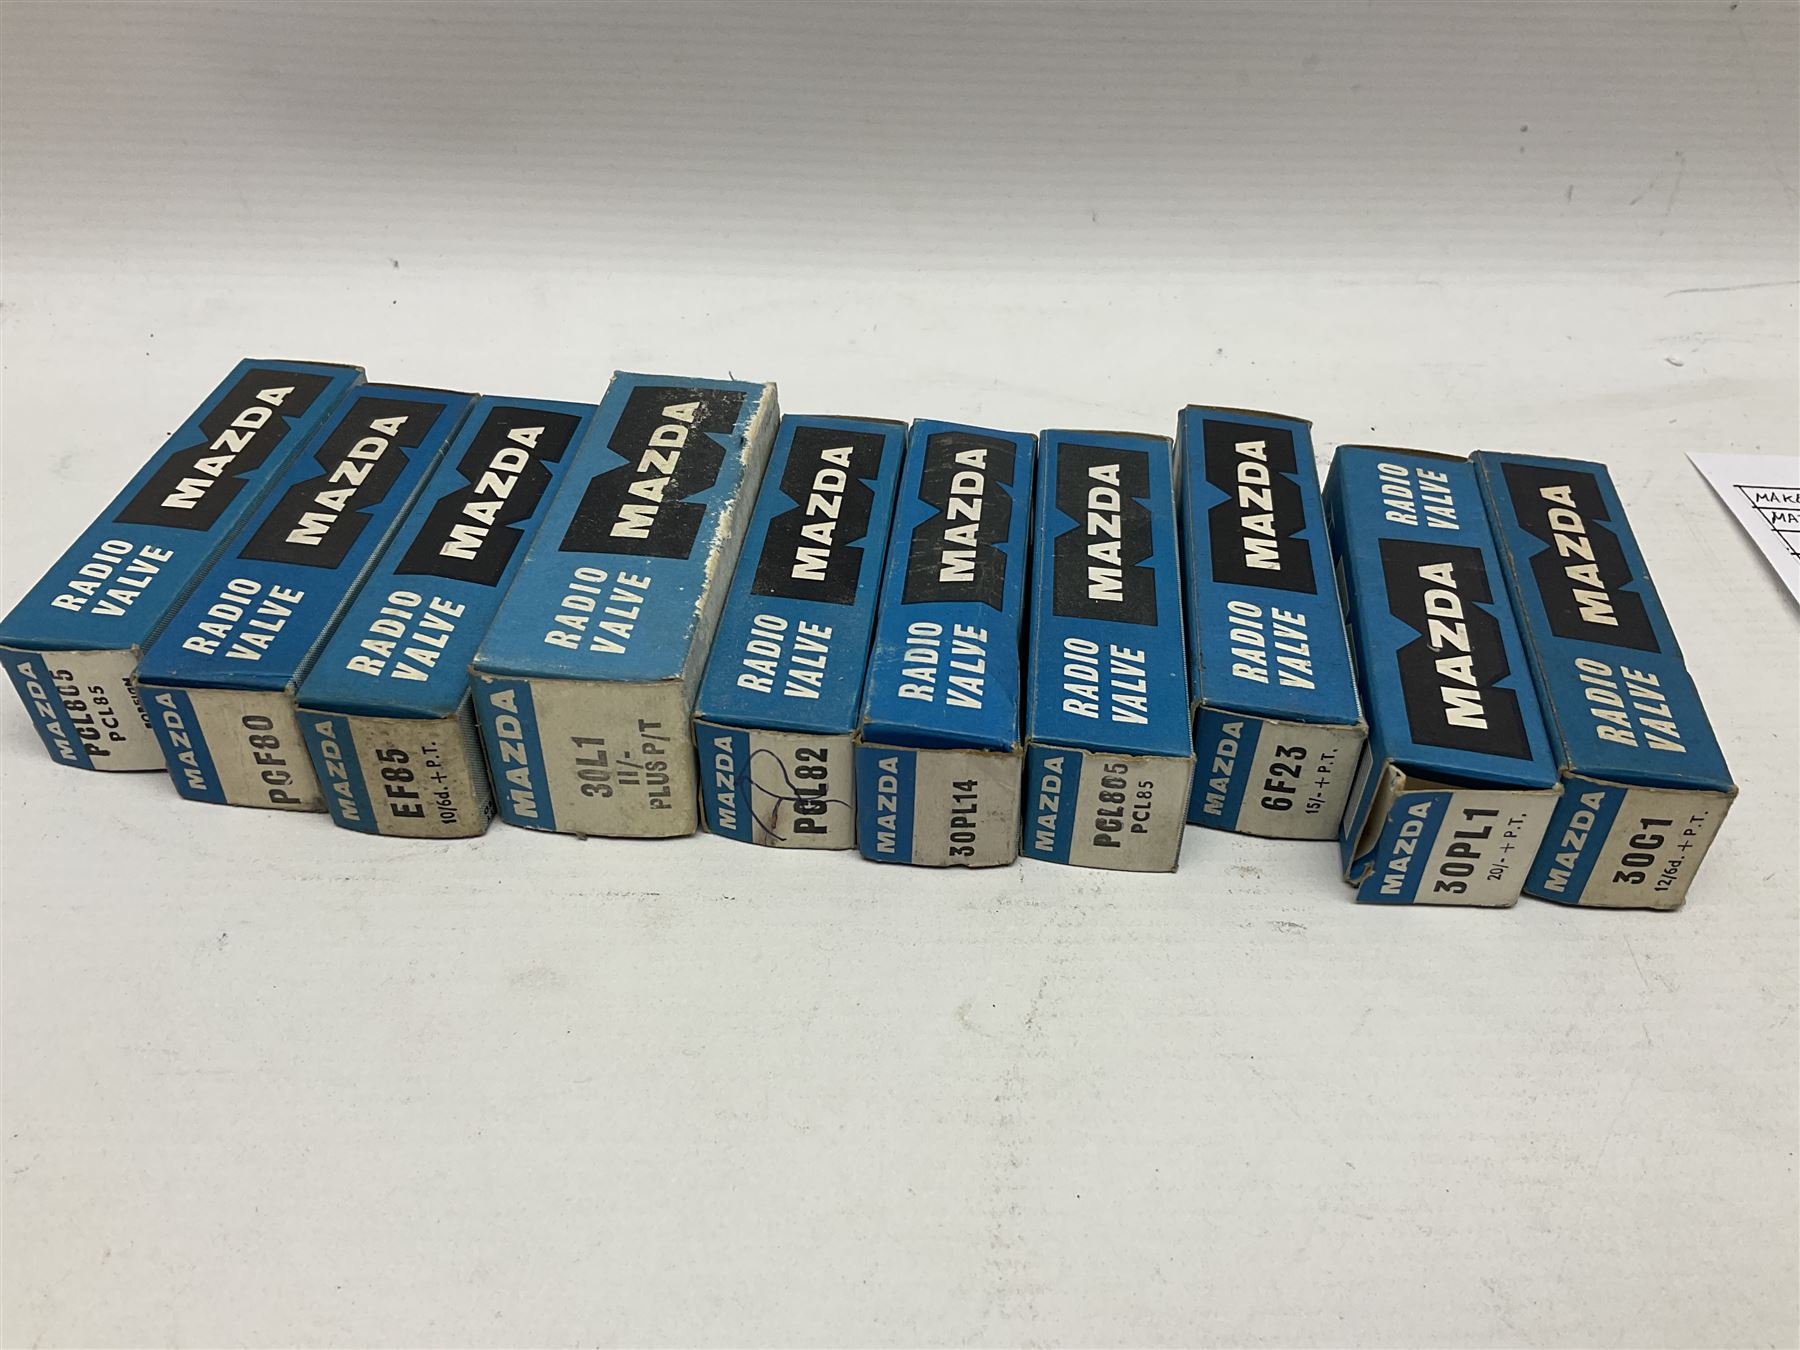 Collection of Mazda thermionic radio valves/vacuum tubes - Image 10 of 11